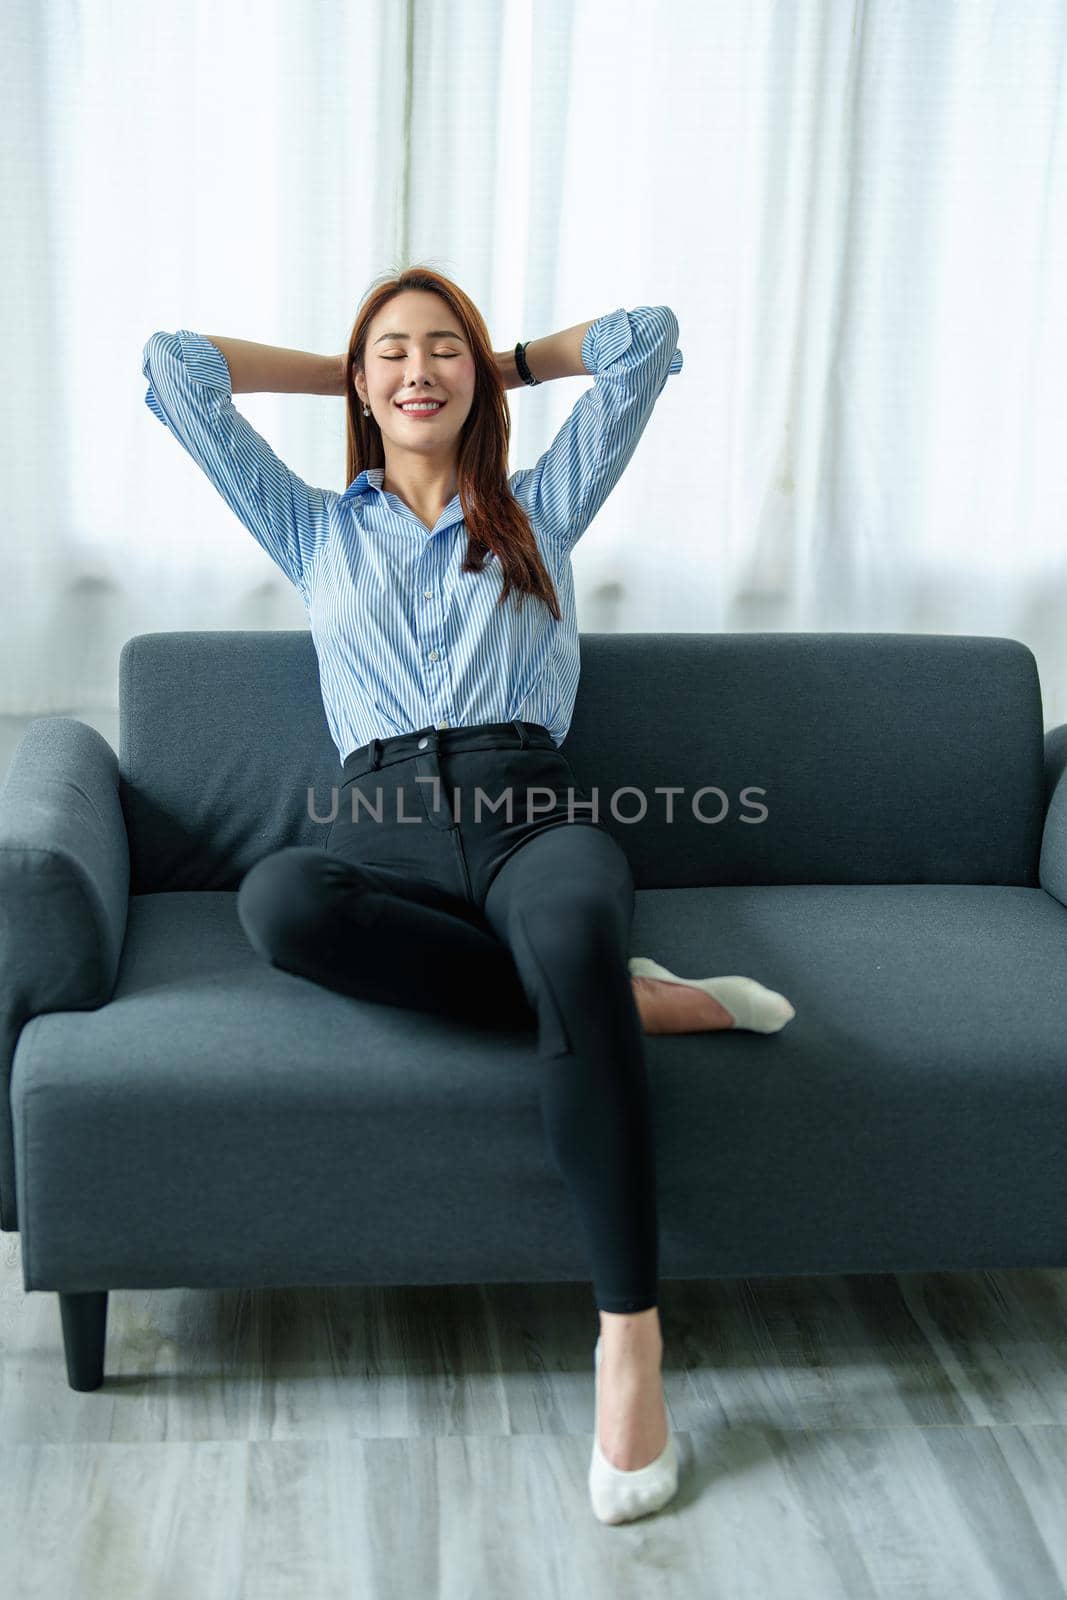 personal business, business owner, leisure, pleasure from work, portrait of an Asian woman smiling happily at home.